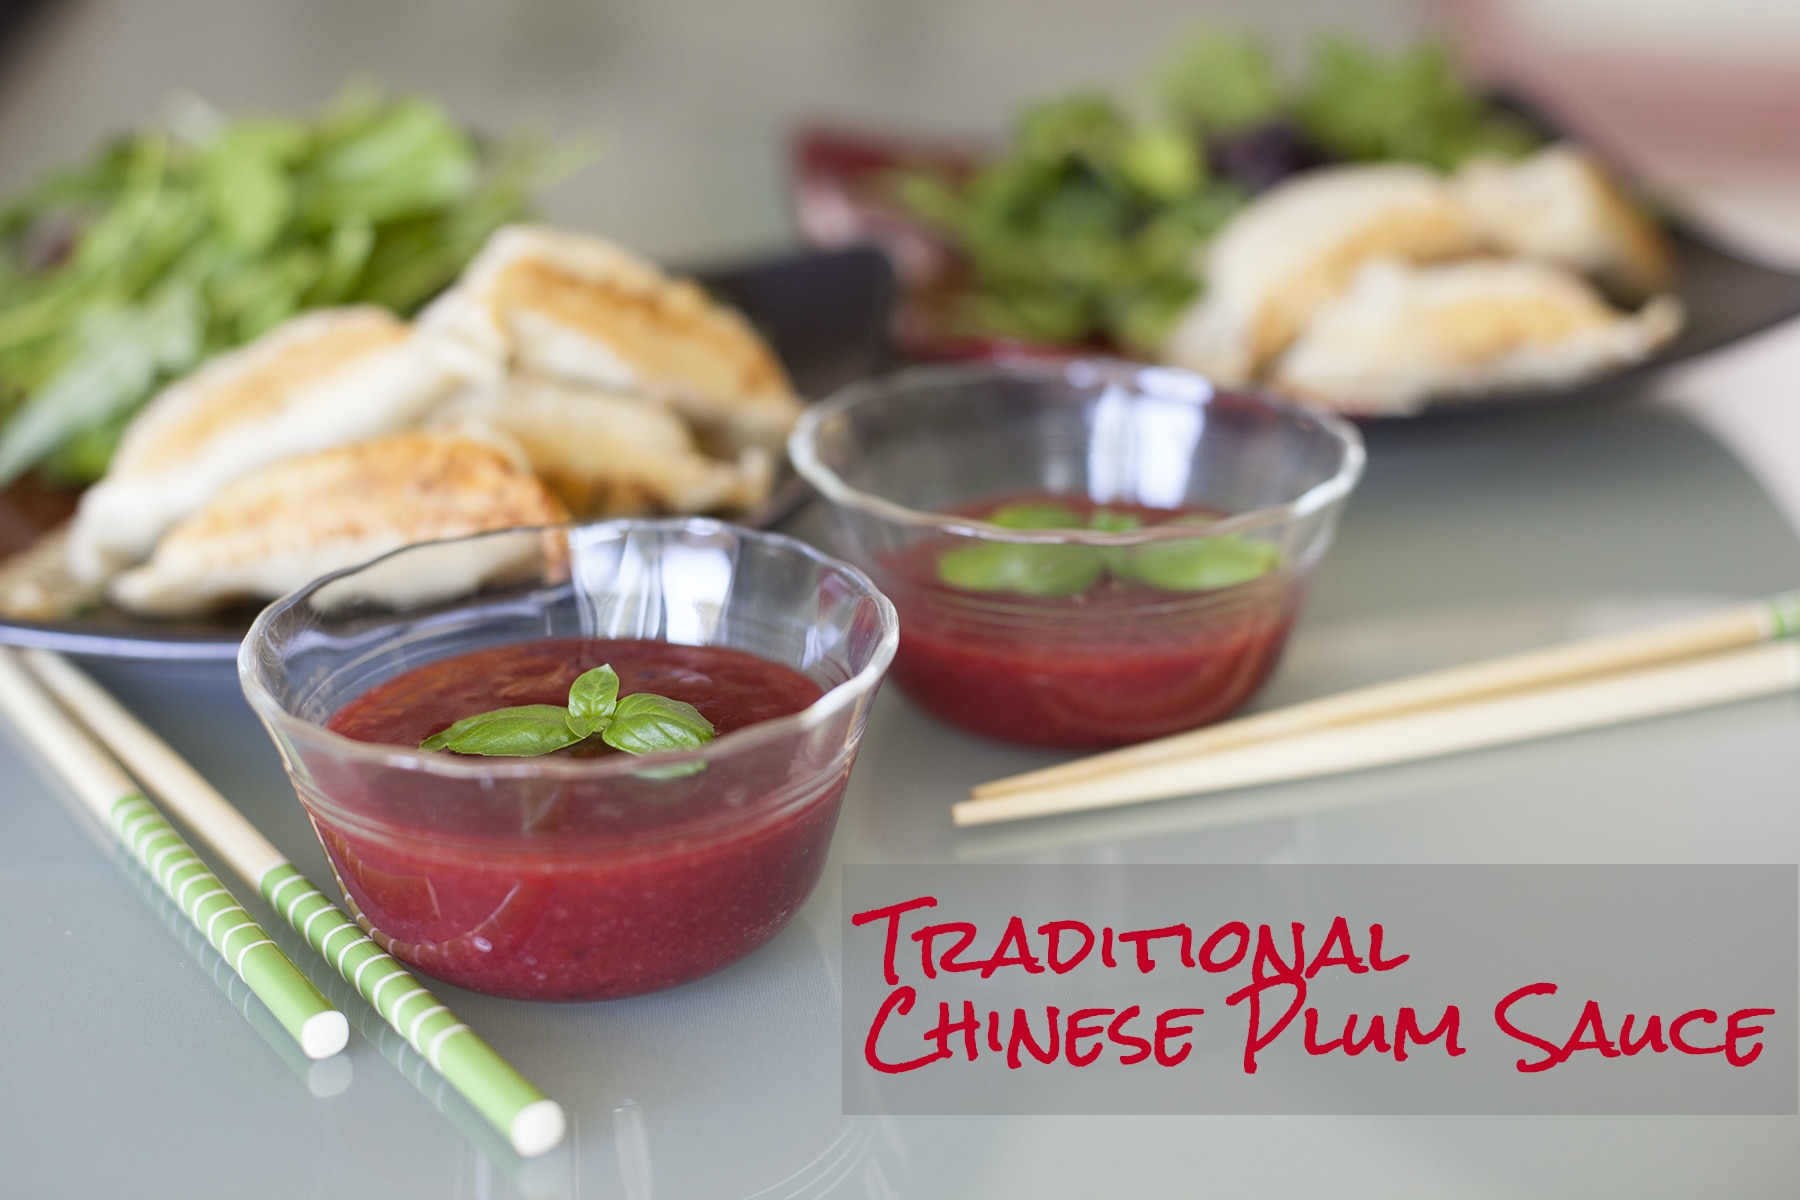 Traditional Chinese Plum Sauce from Scratch